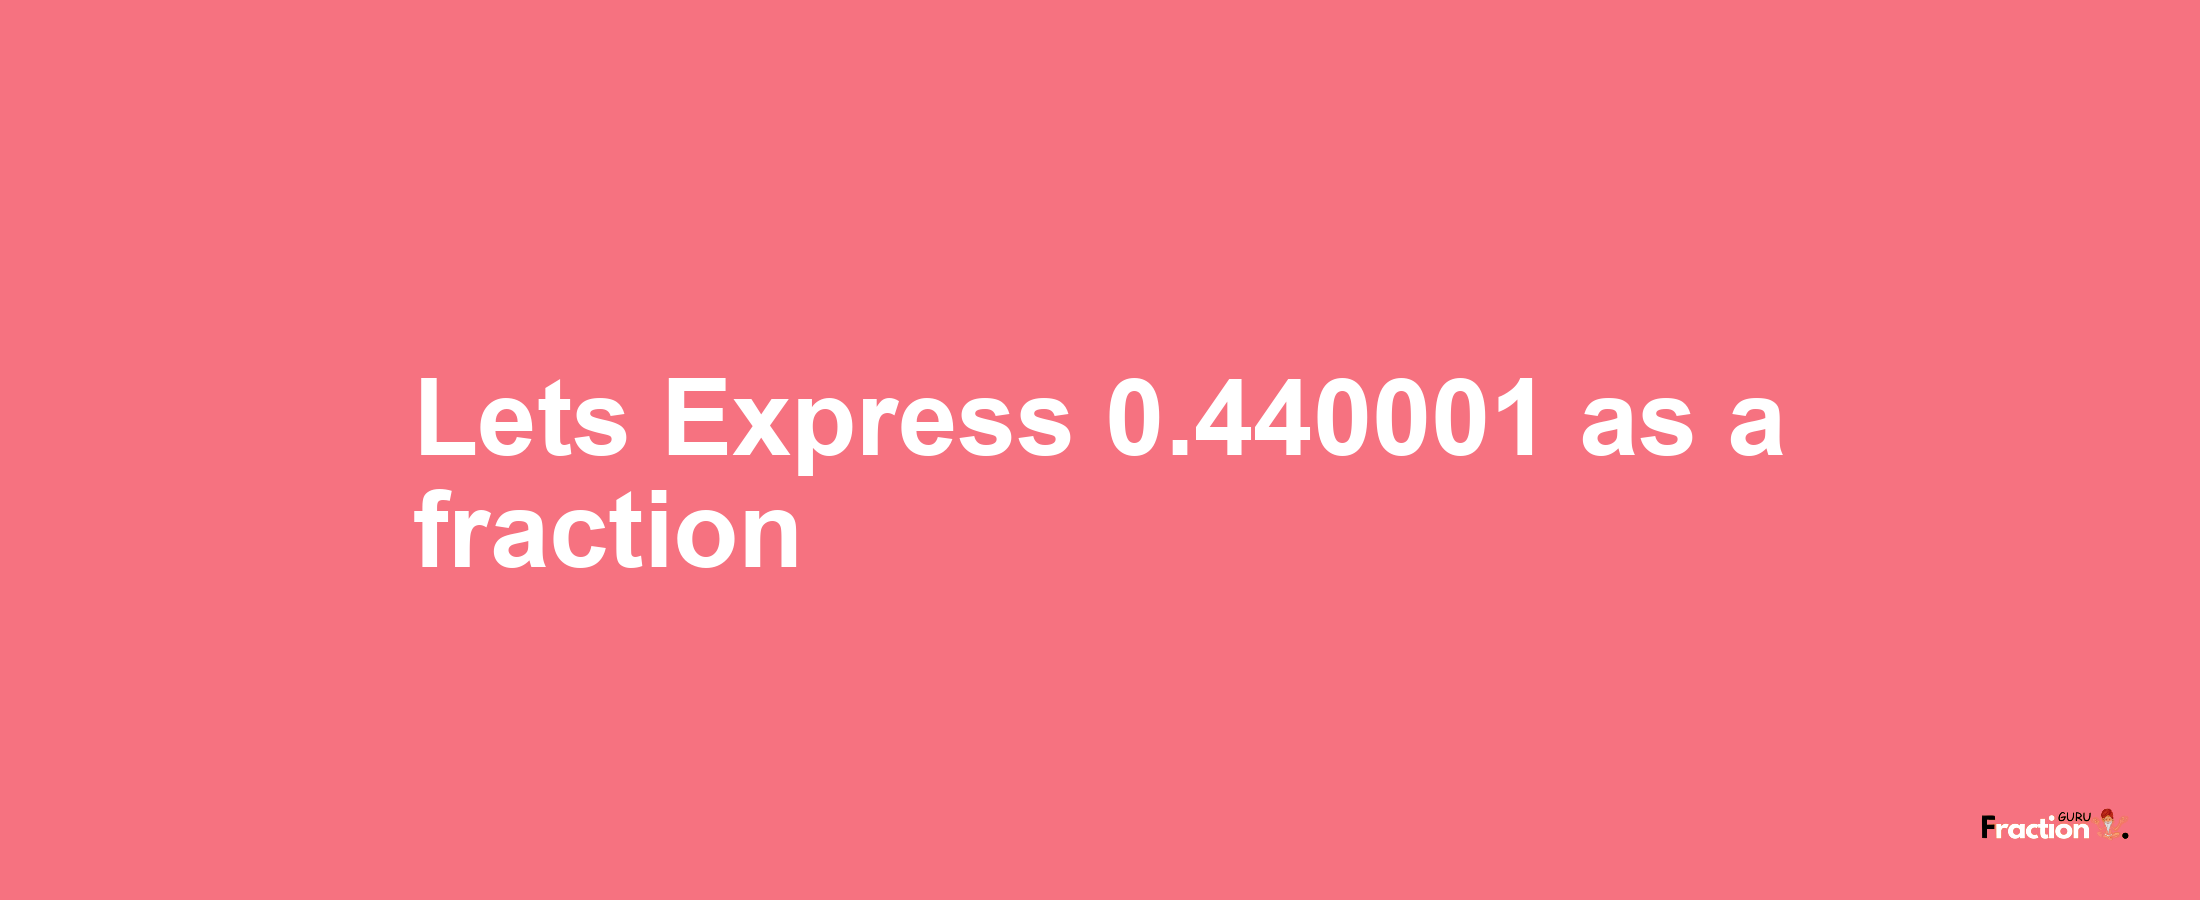 Lets Express 0.440001 as afraction